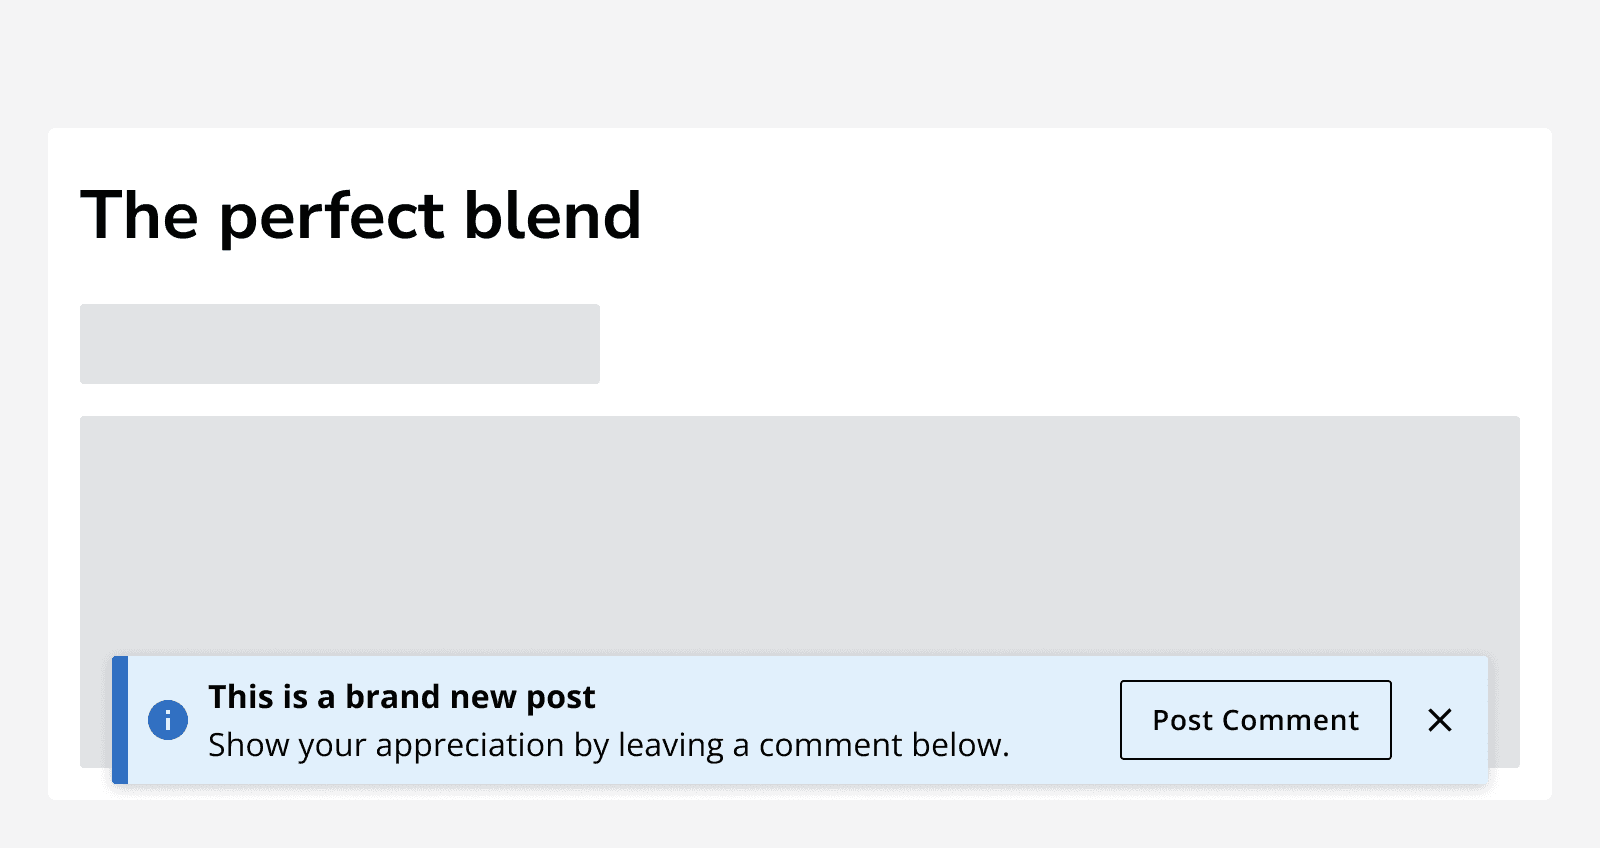 An article titled ‘The perfect blend’ with an information alert overlaid on top of the page content.